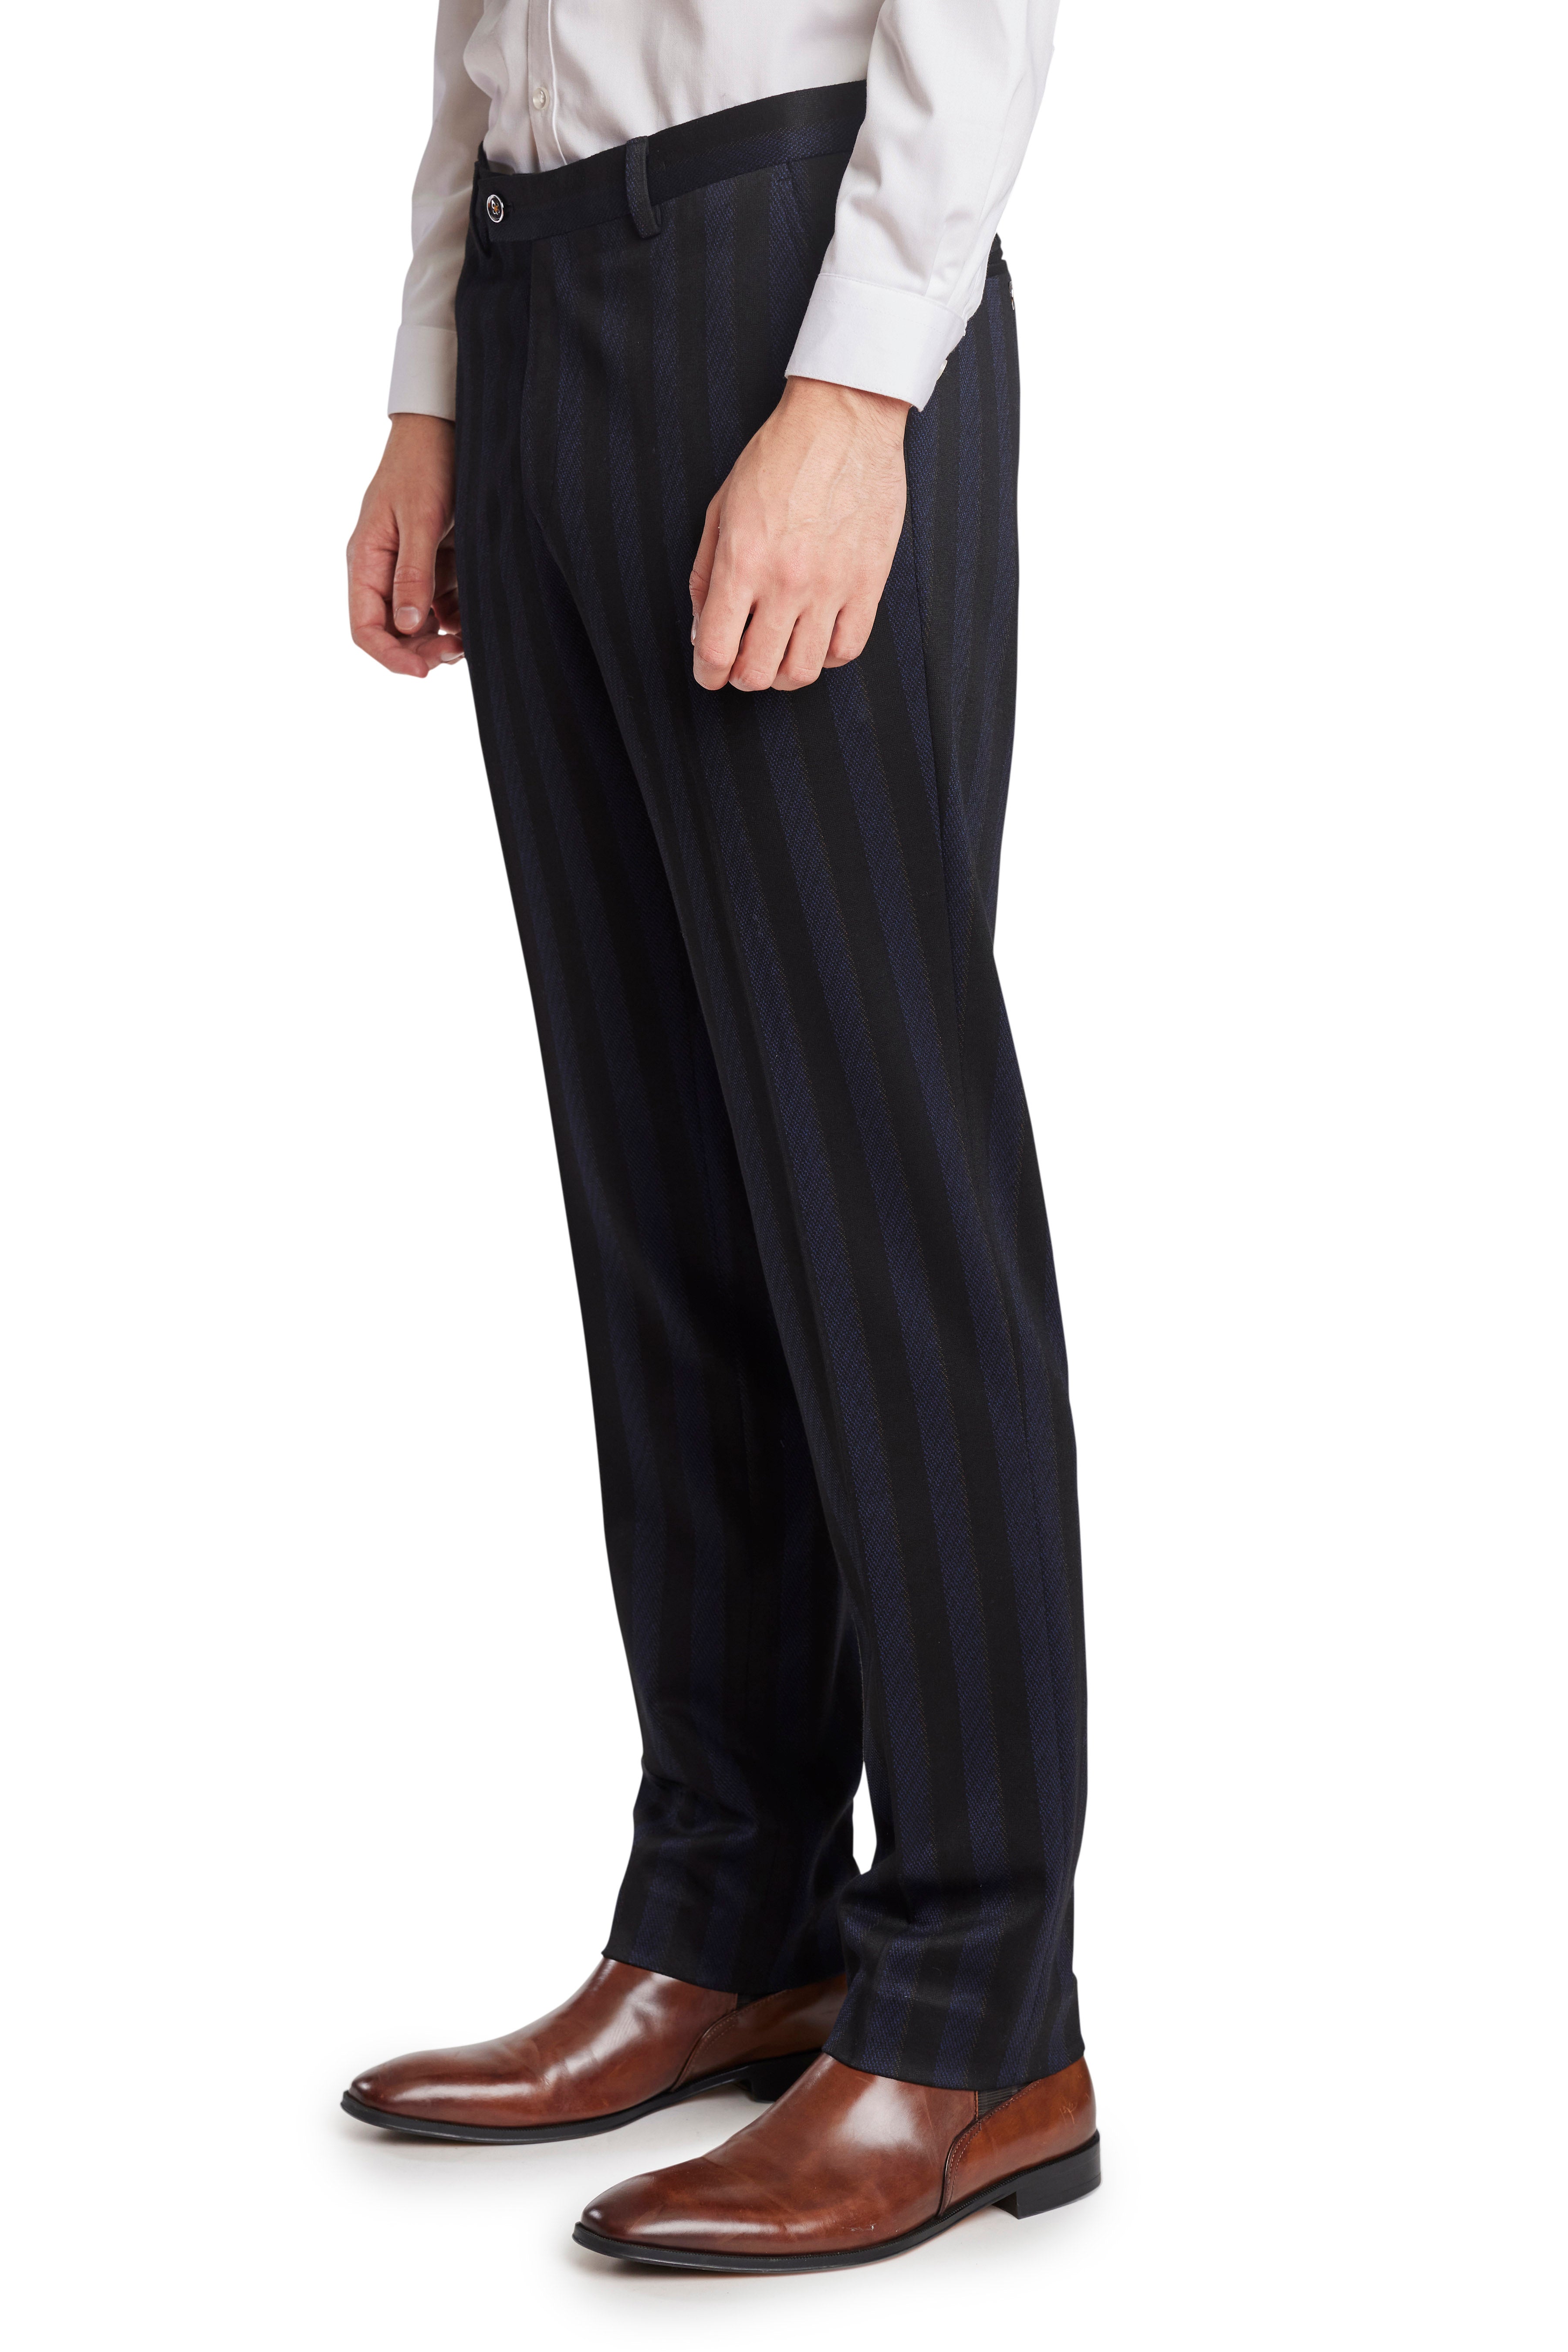 Buy SHOWOFF Women's Mid-Rise Black Striped Straight Fit Formal Trousers-IM-9895_Black_30  at Amazon.in